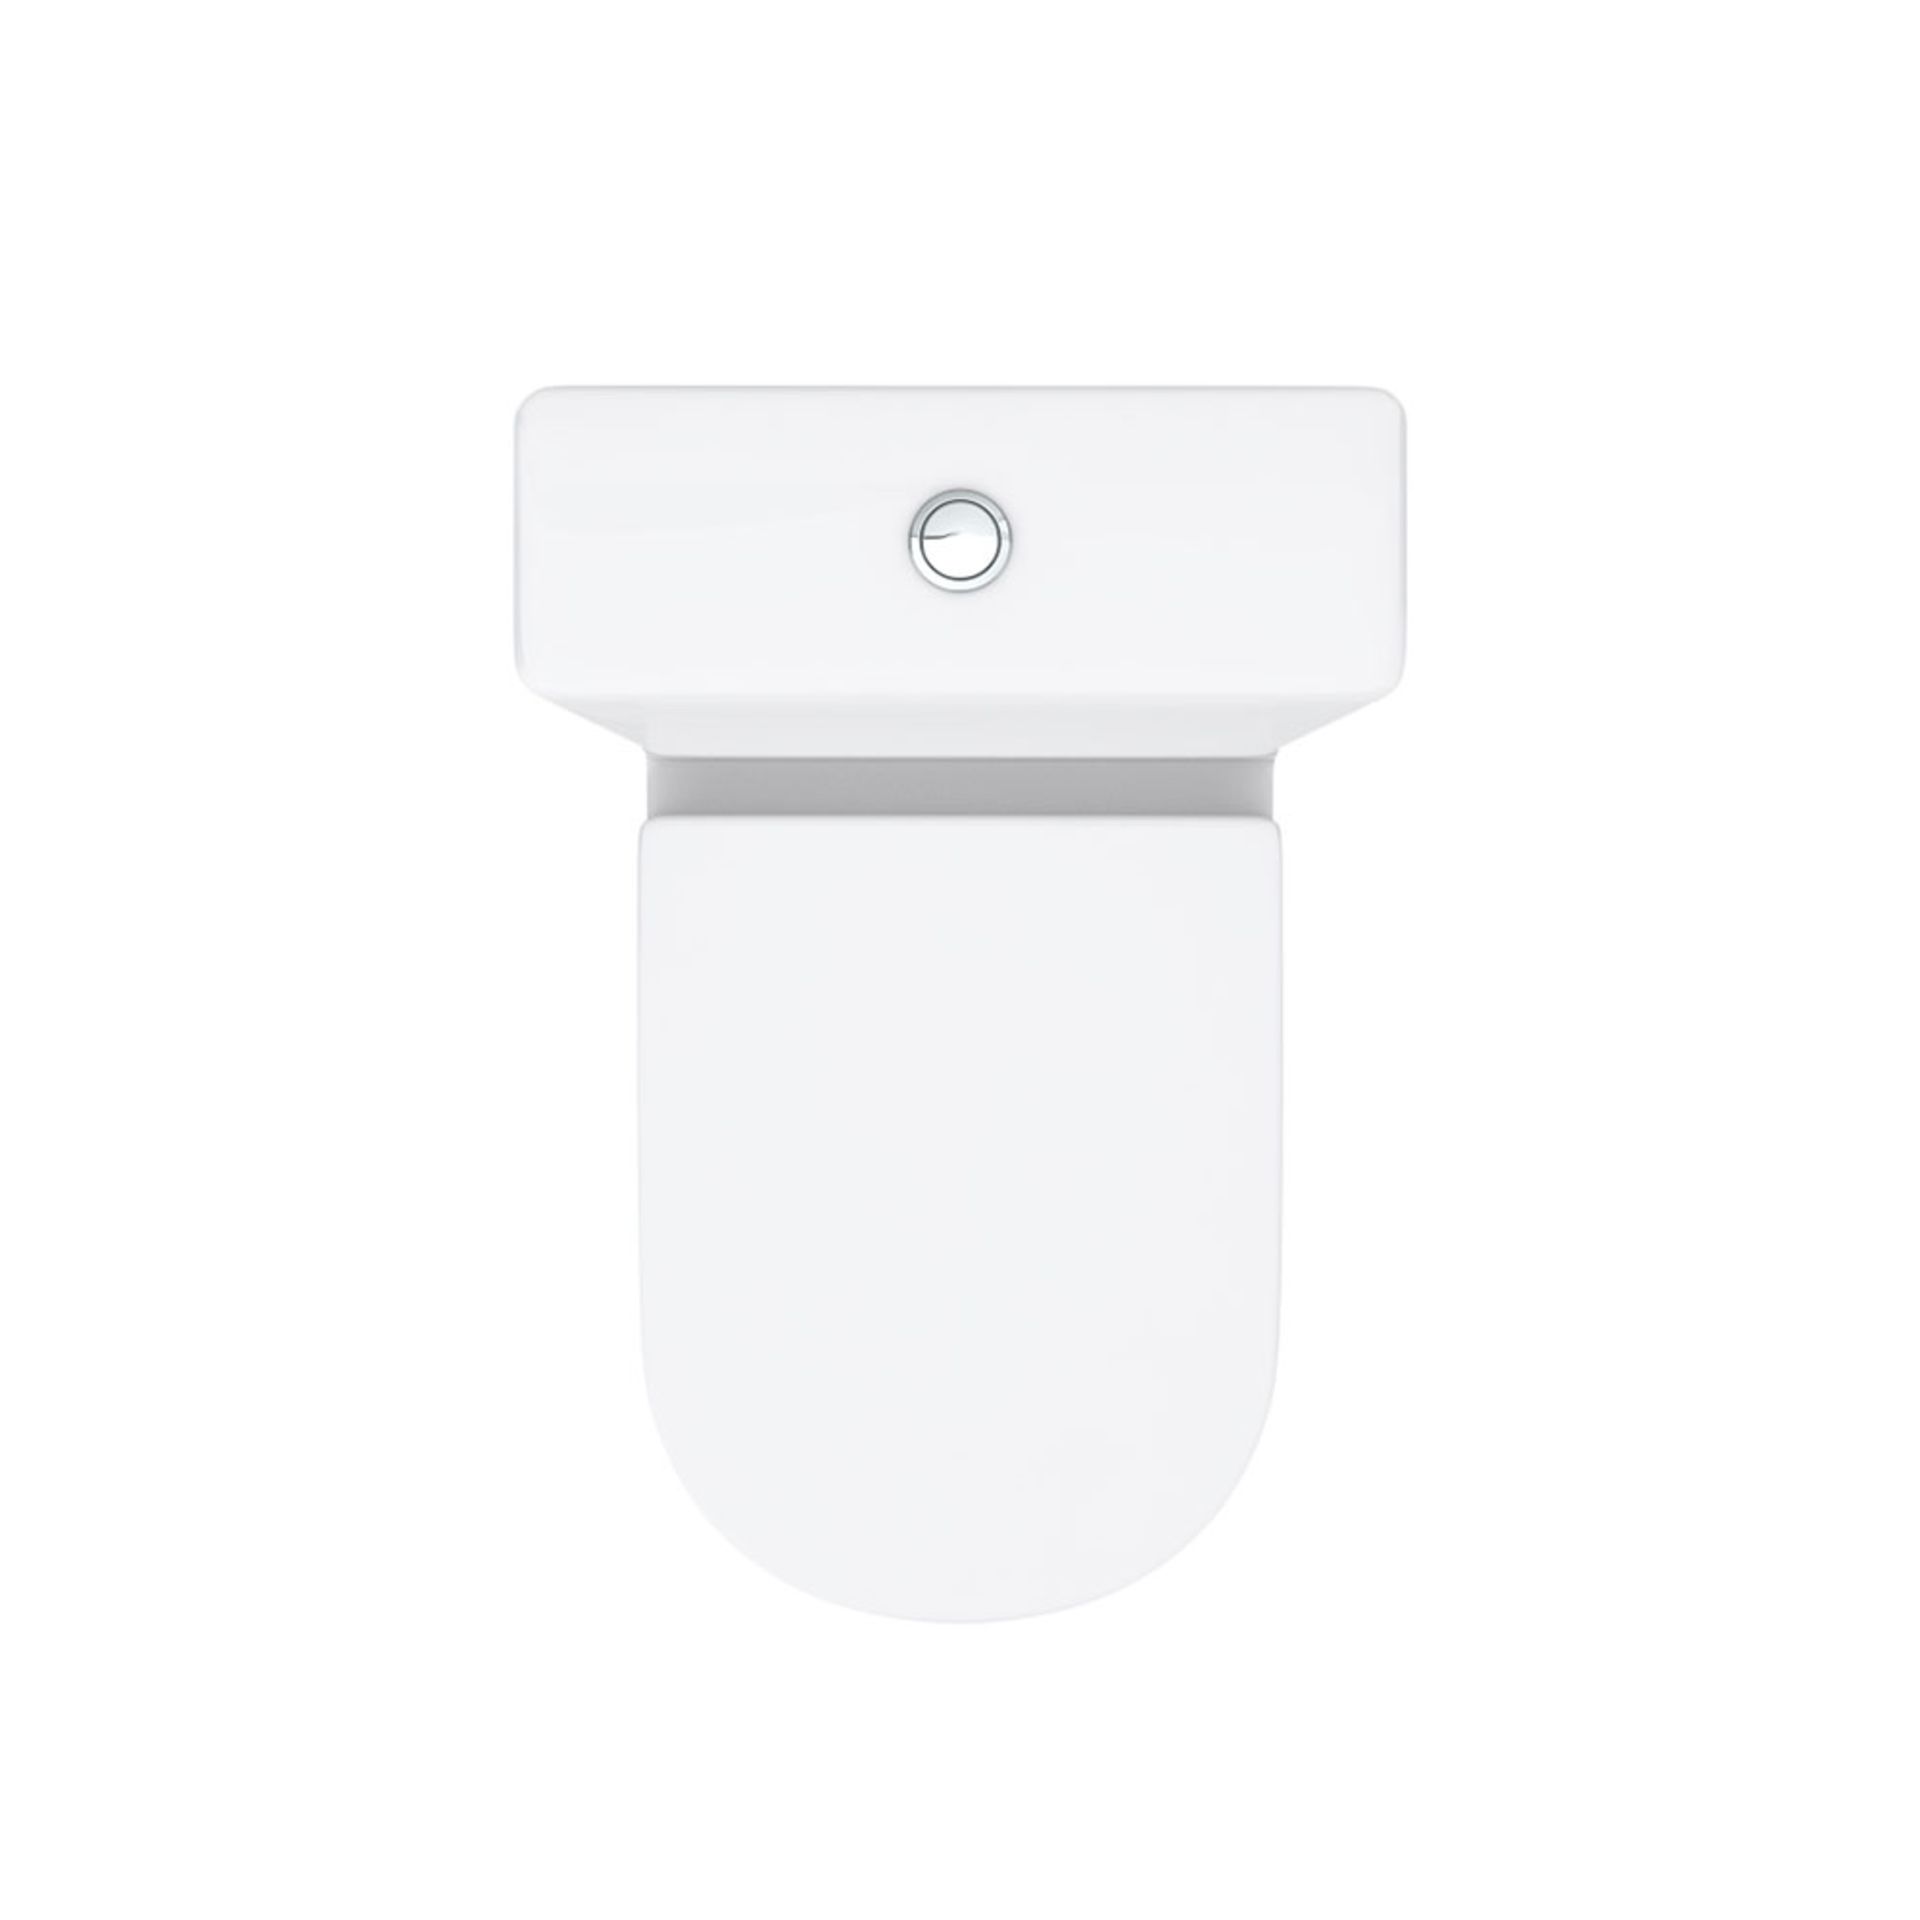 Metro short projection close coupled toilet pan with seat and dual flush cistern kit. IC506 - Image 4 of 4